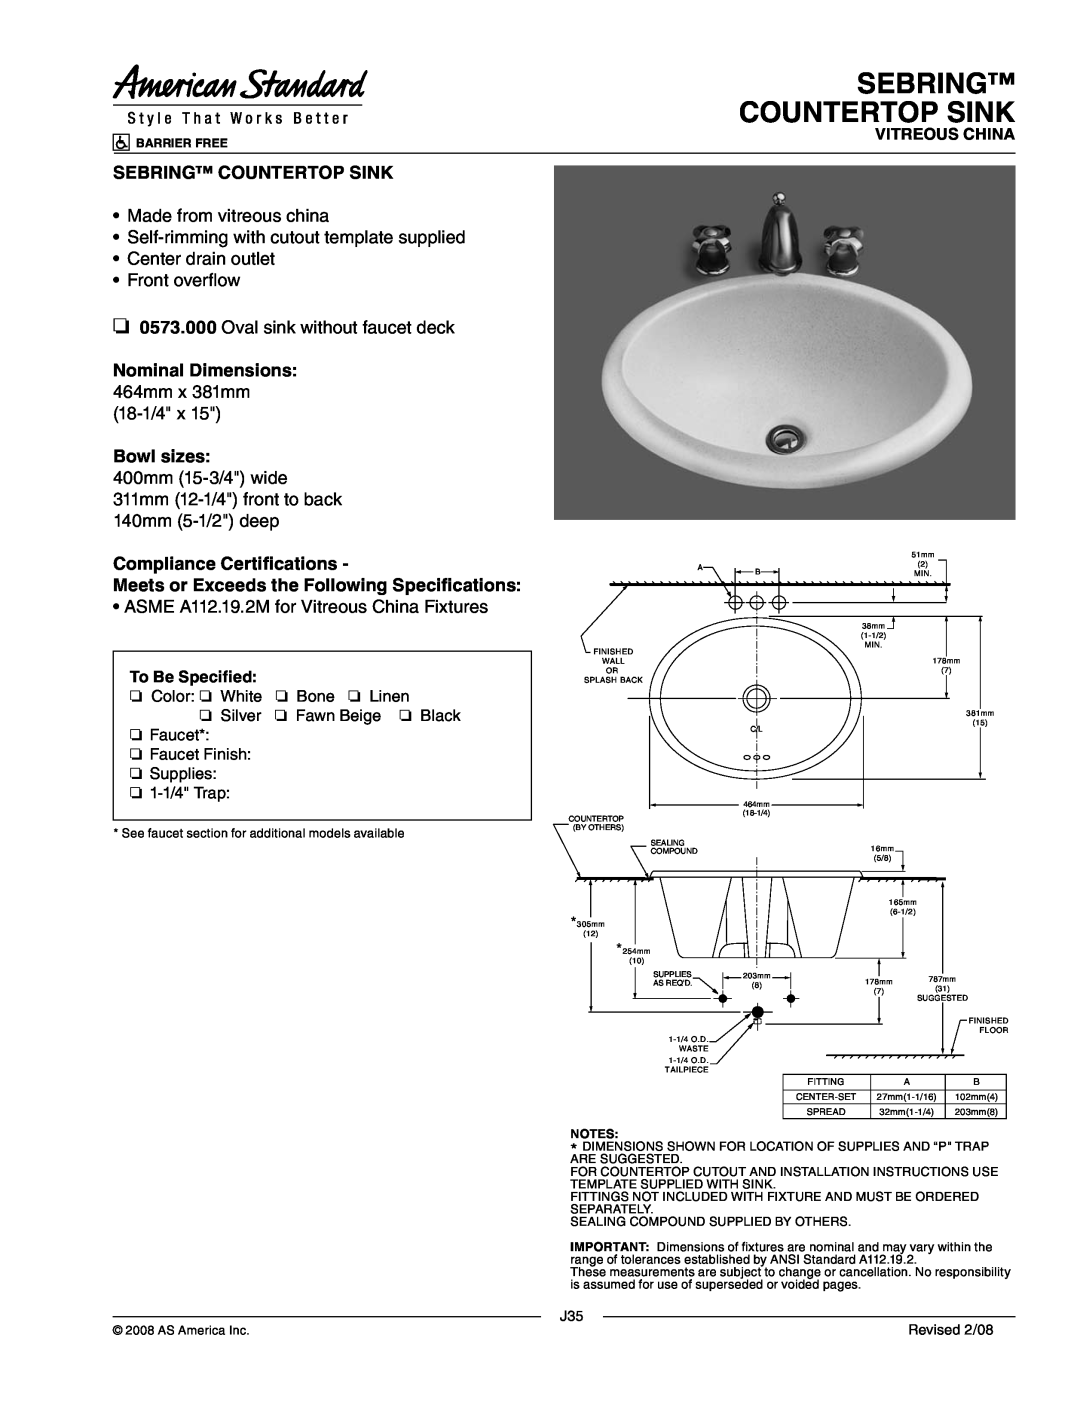 American Standard 0573.000 dimensions Sebring Countertop Sink, Made from vitreous china, Oval sink without faucet deck 